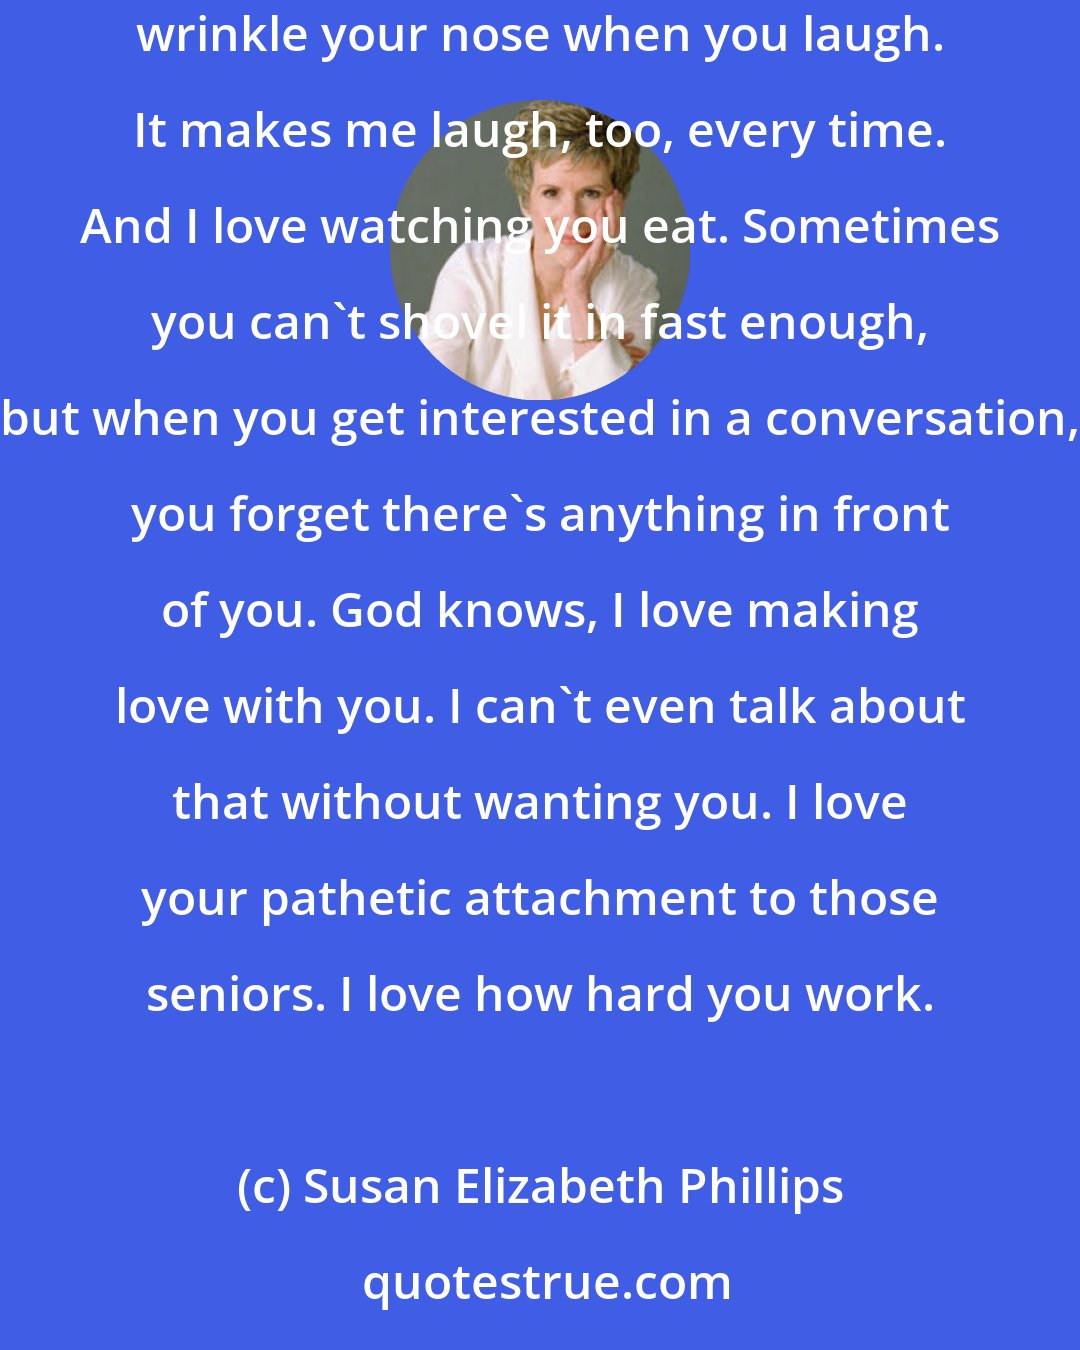 Susan Elizabeth Phillips: You're beautiful, every part of you. I love your hair, the way it looks, the way it feels. I love touching it, smelling it. I love the way you wrinkle your nose when you laugh. It makes me laugh, too, every time. And I love watching you eat. Sometimes you can't shovel it in fast enough, but when you get interested in a conversation, you forget there's anything in front of you. God knows, I love making love with you. I can't even talk about that without wanting you. I love your pathetic attachment to those seniors. I love how hard you work.